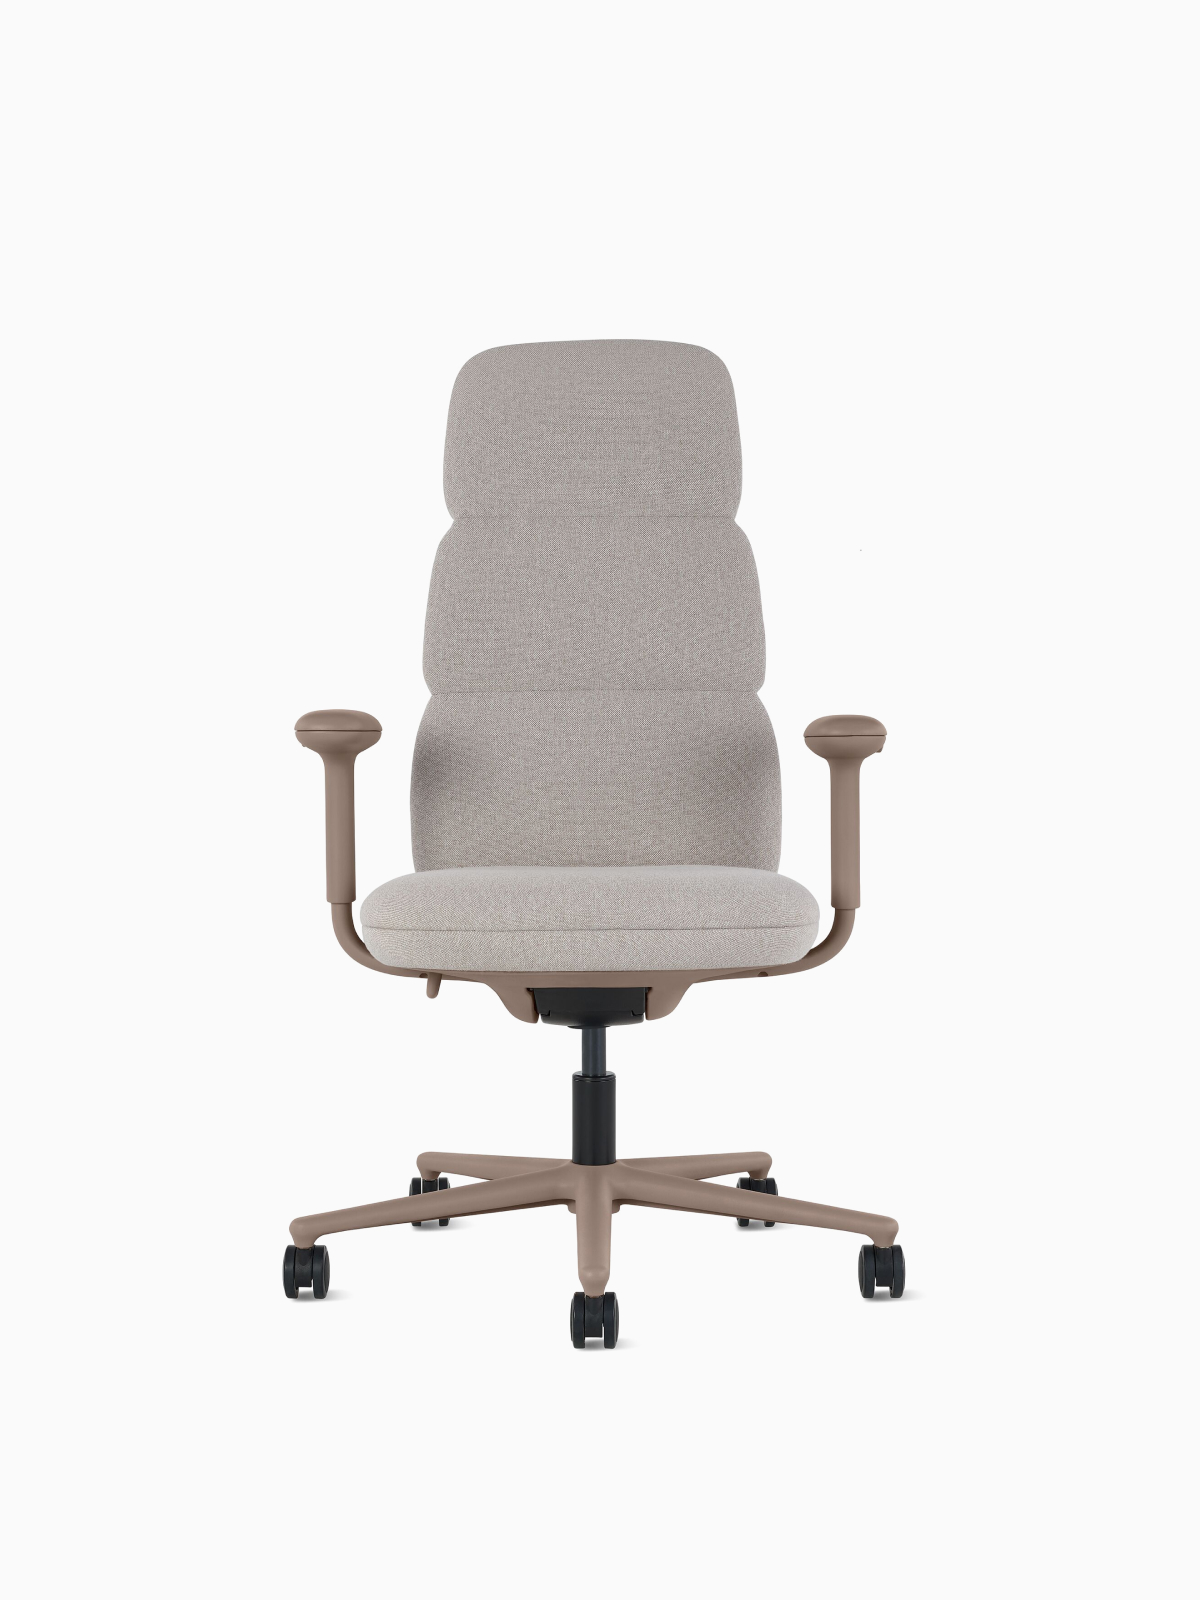 https://www.hermanmiller.com/content/dam/hmicom/page_assets/products/asari_chair_by_herman_miller/th_prd_asari_chair_by_herman_miller_office_chairs_fn.jpg